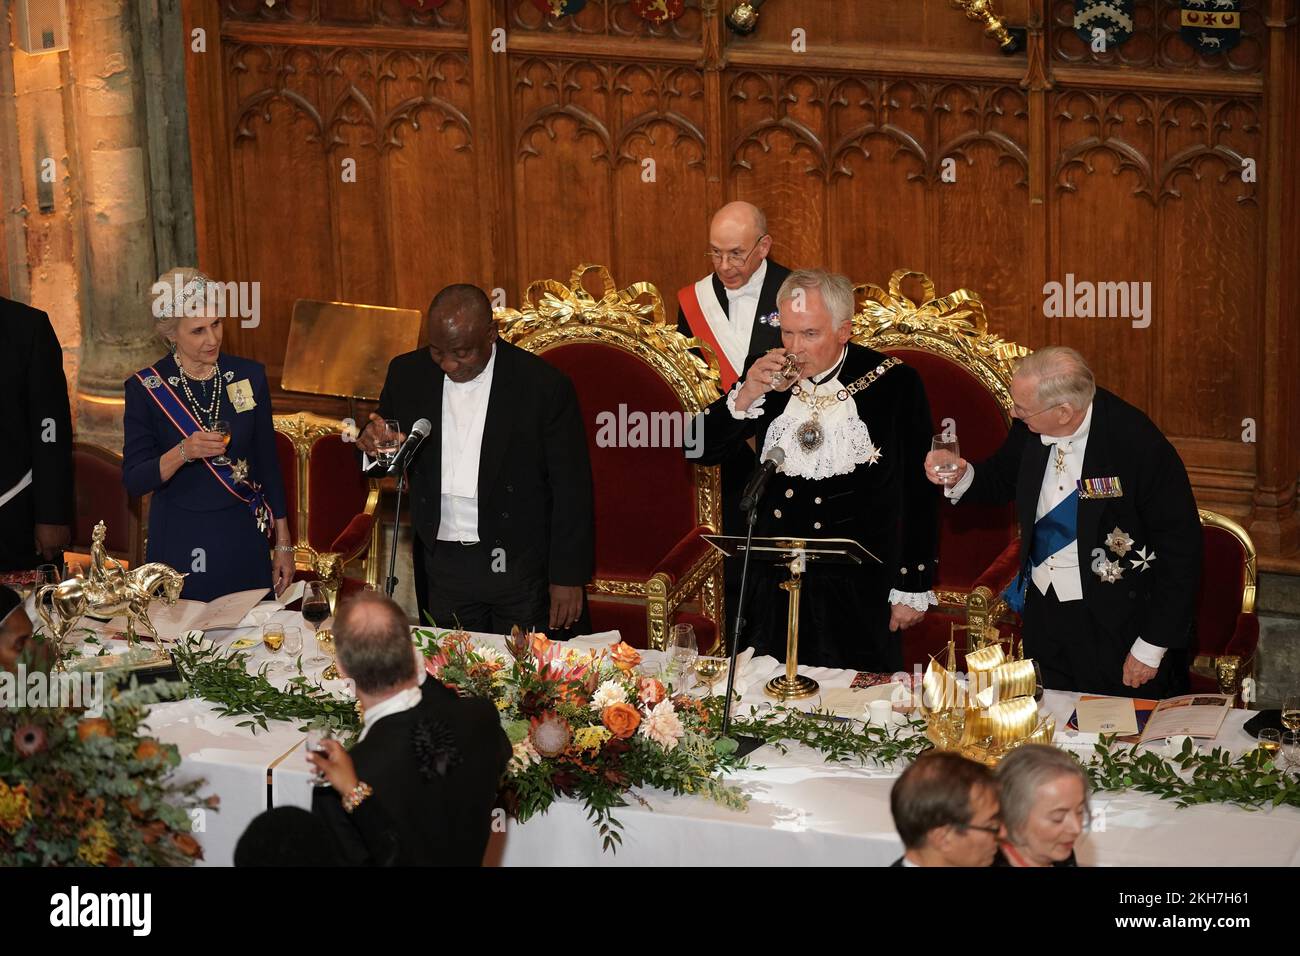 President Cyril Ramaphosa of South Africa raises a toast to the Lord Mayor of London, Nicholas Lyons, (second right) the Duke (right) and Duchess of Gloucester (second left) during a banquet at the Guildhall in London, given by the Lord Mayor and City of London Corporation, during his state visit to the UK. Picture date: Wednesday November 23, 2022. Stock Photo